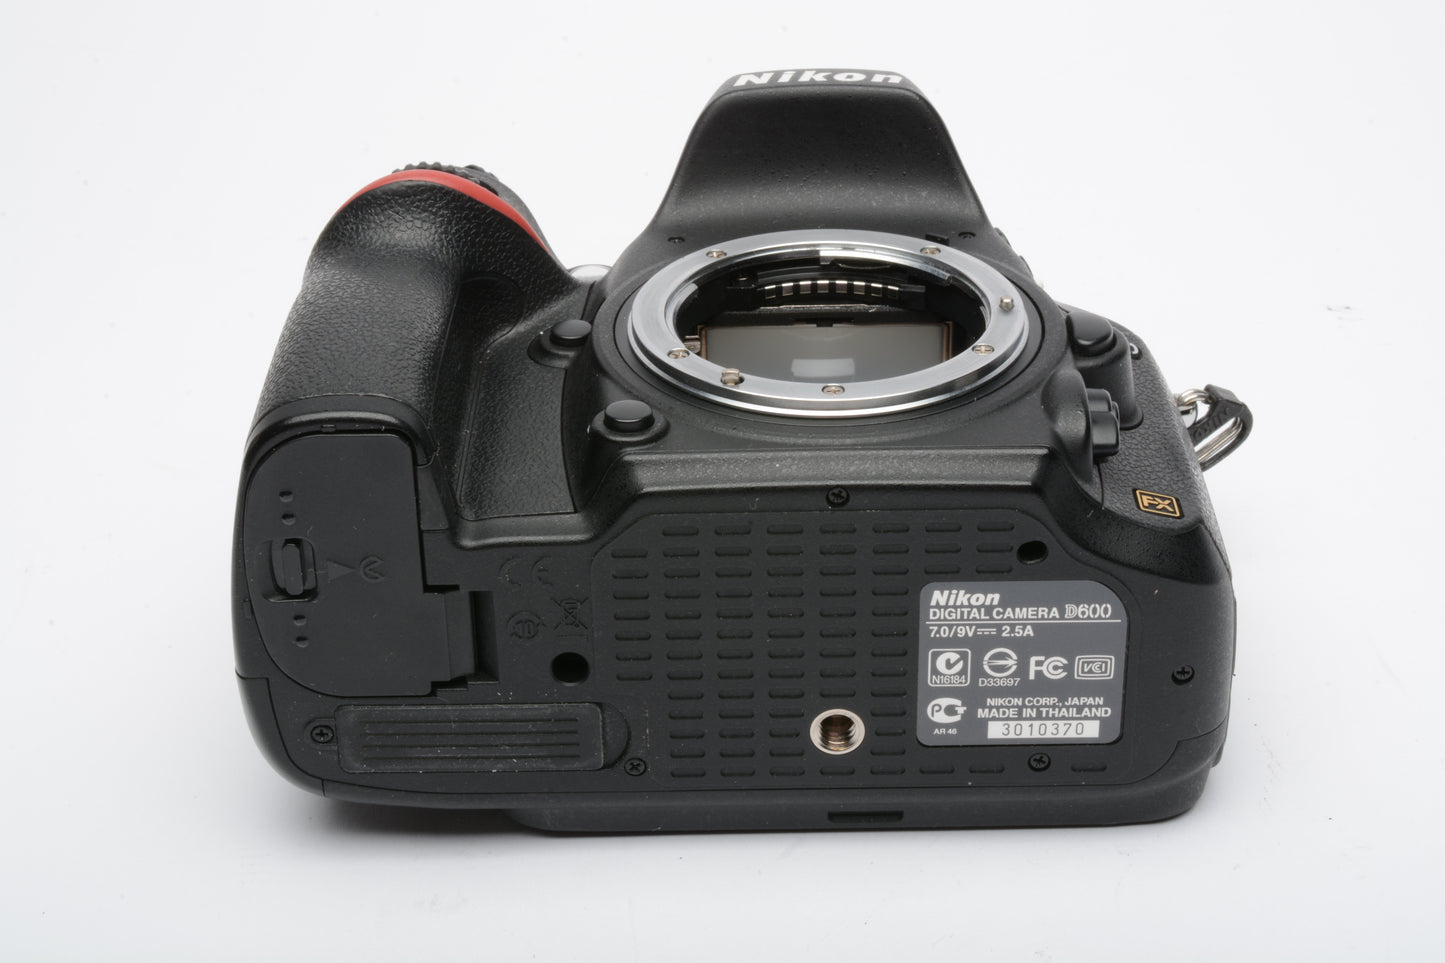 Nikon D600 DSLR Body w/Batt., charger, manual, Only 8308 Acts!